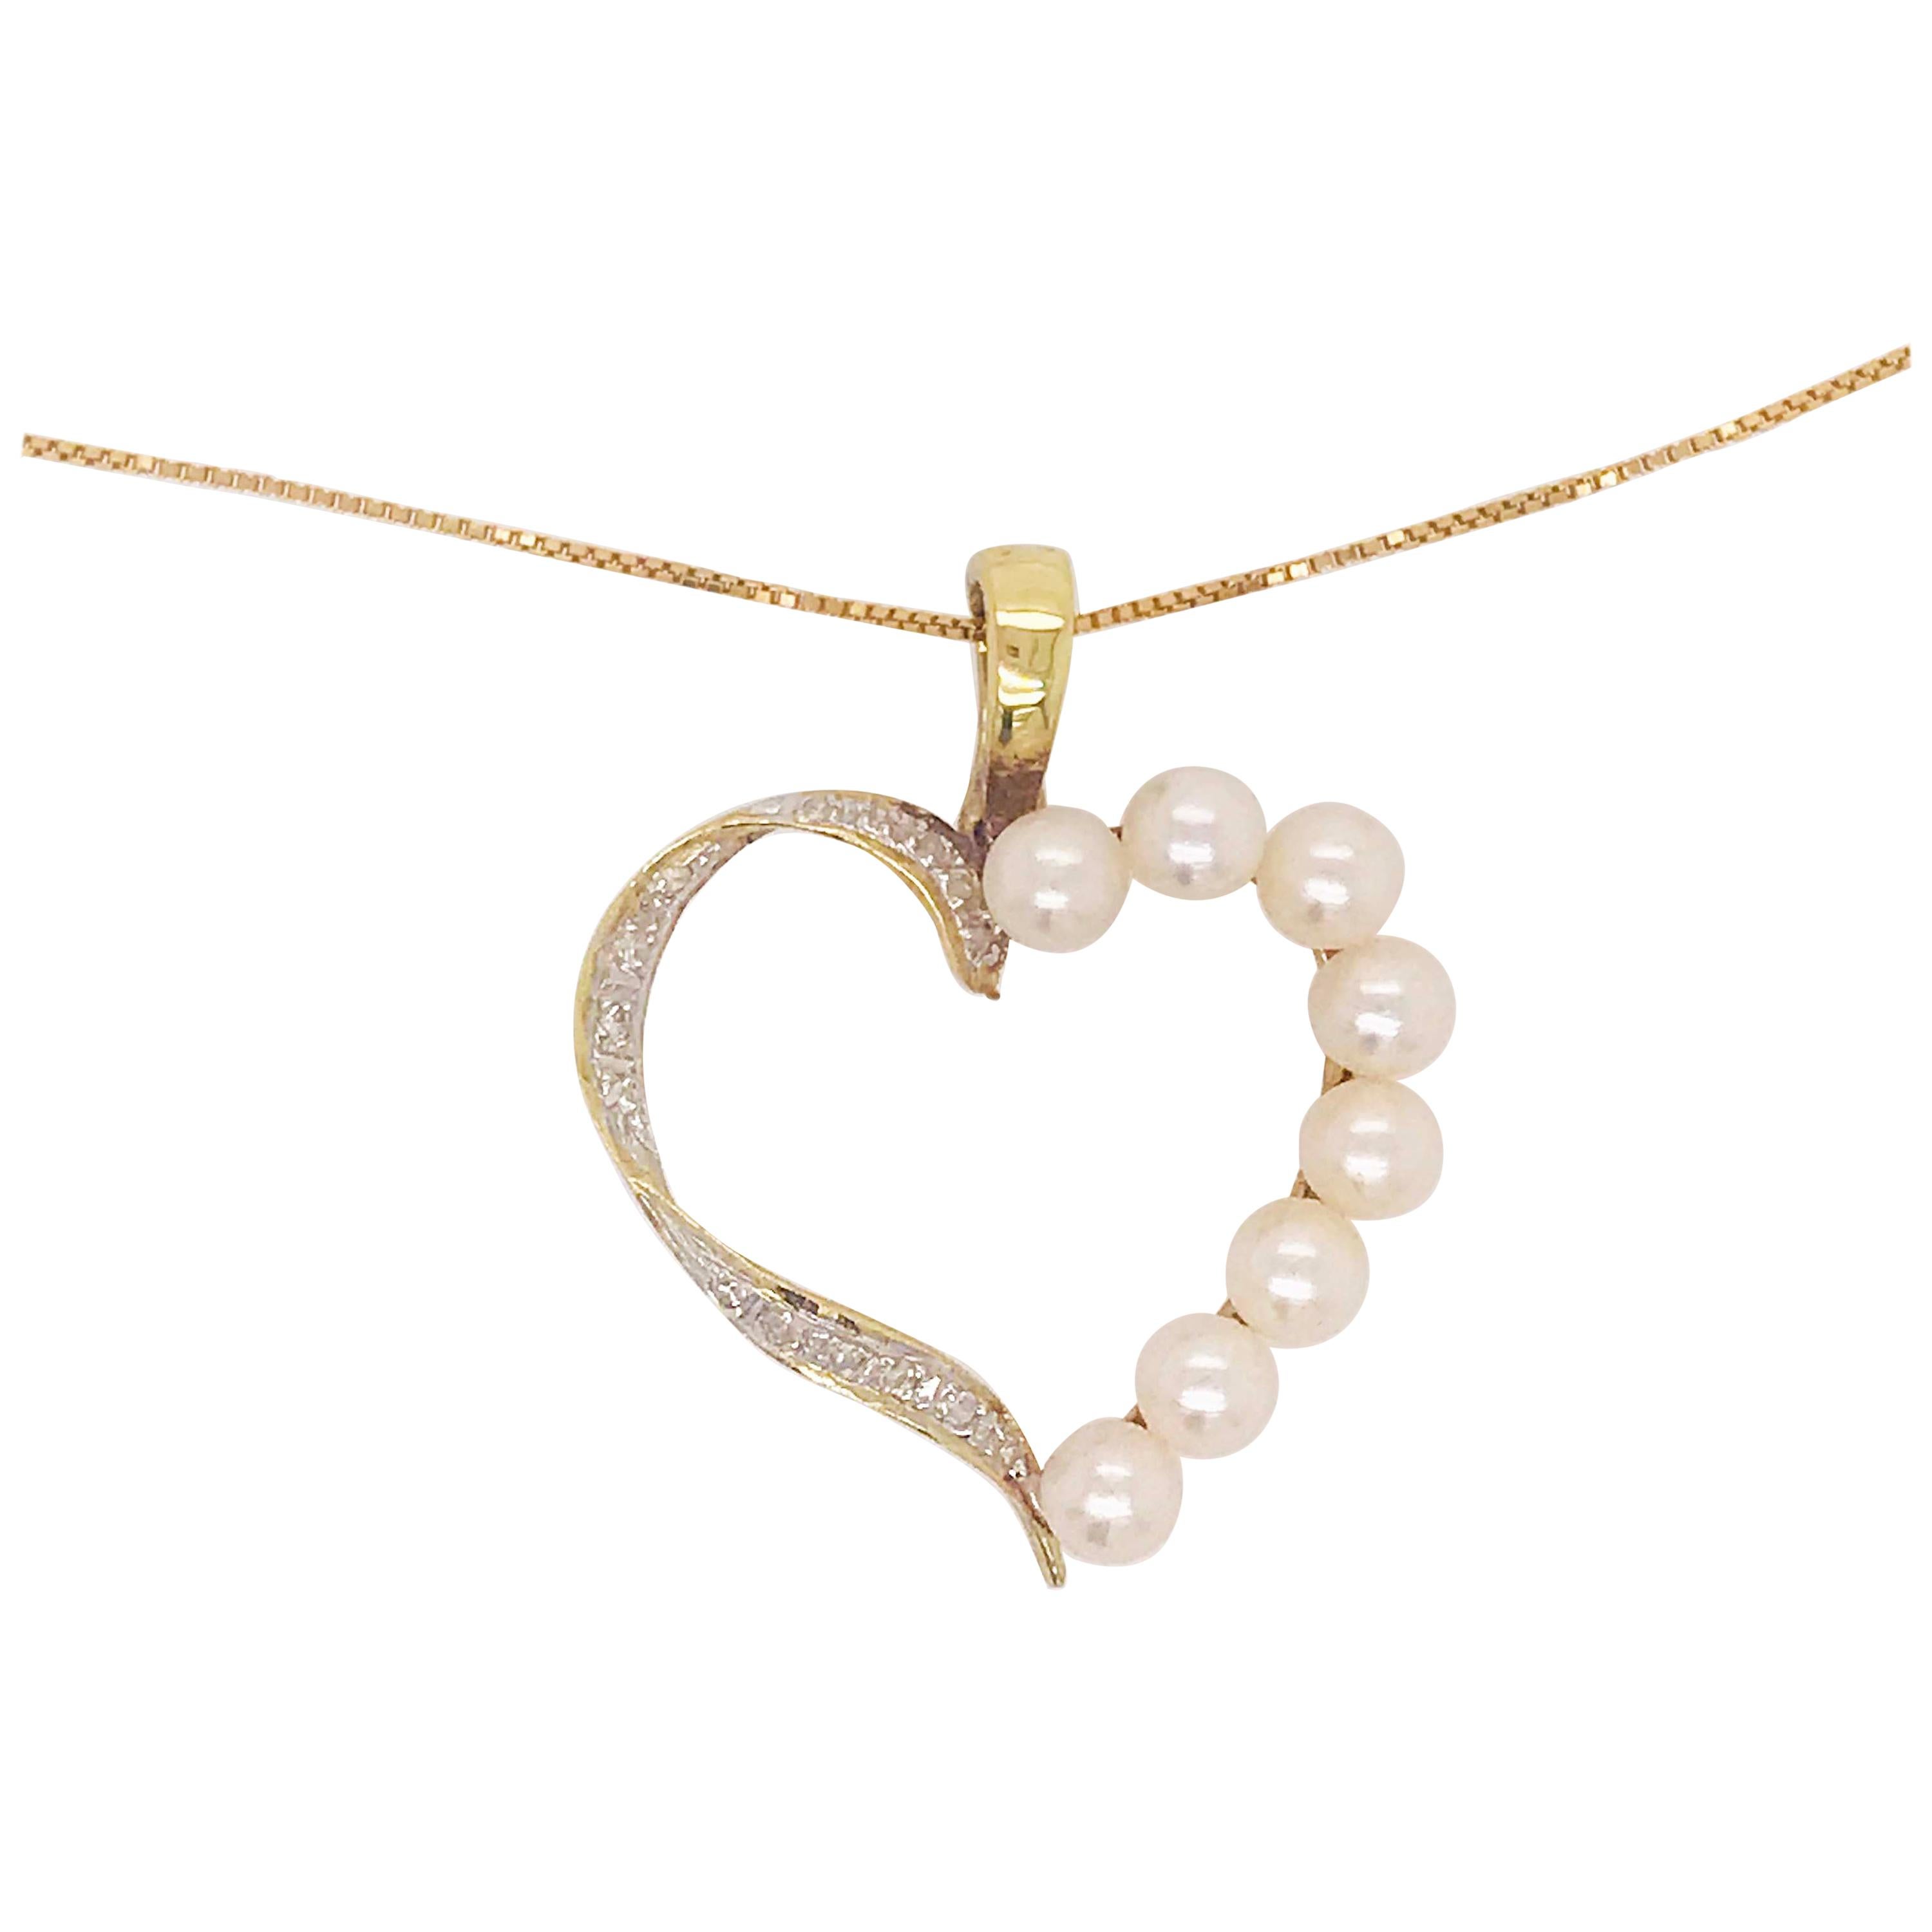 Diamond and Pearl Heart Pendant & Necklace Enhancer with 14 Karat Gold Box Chain